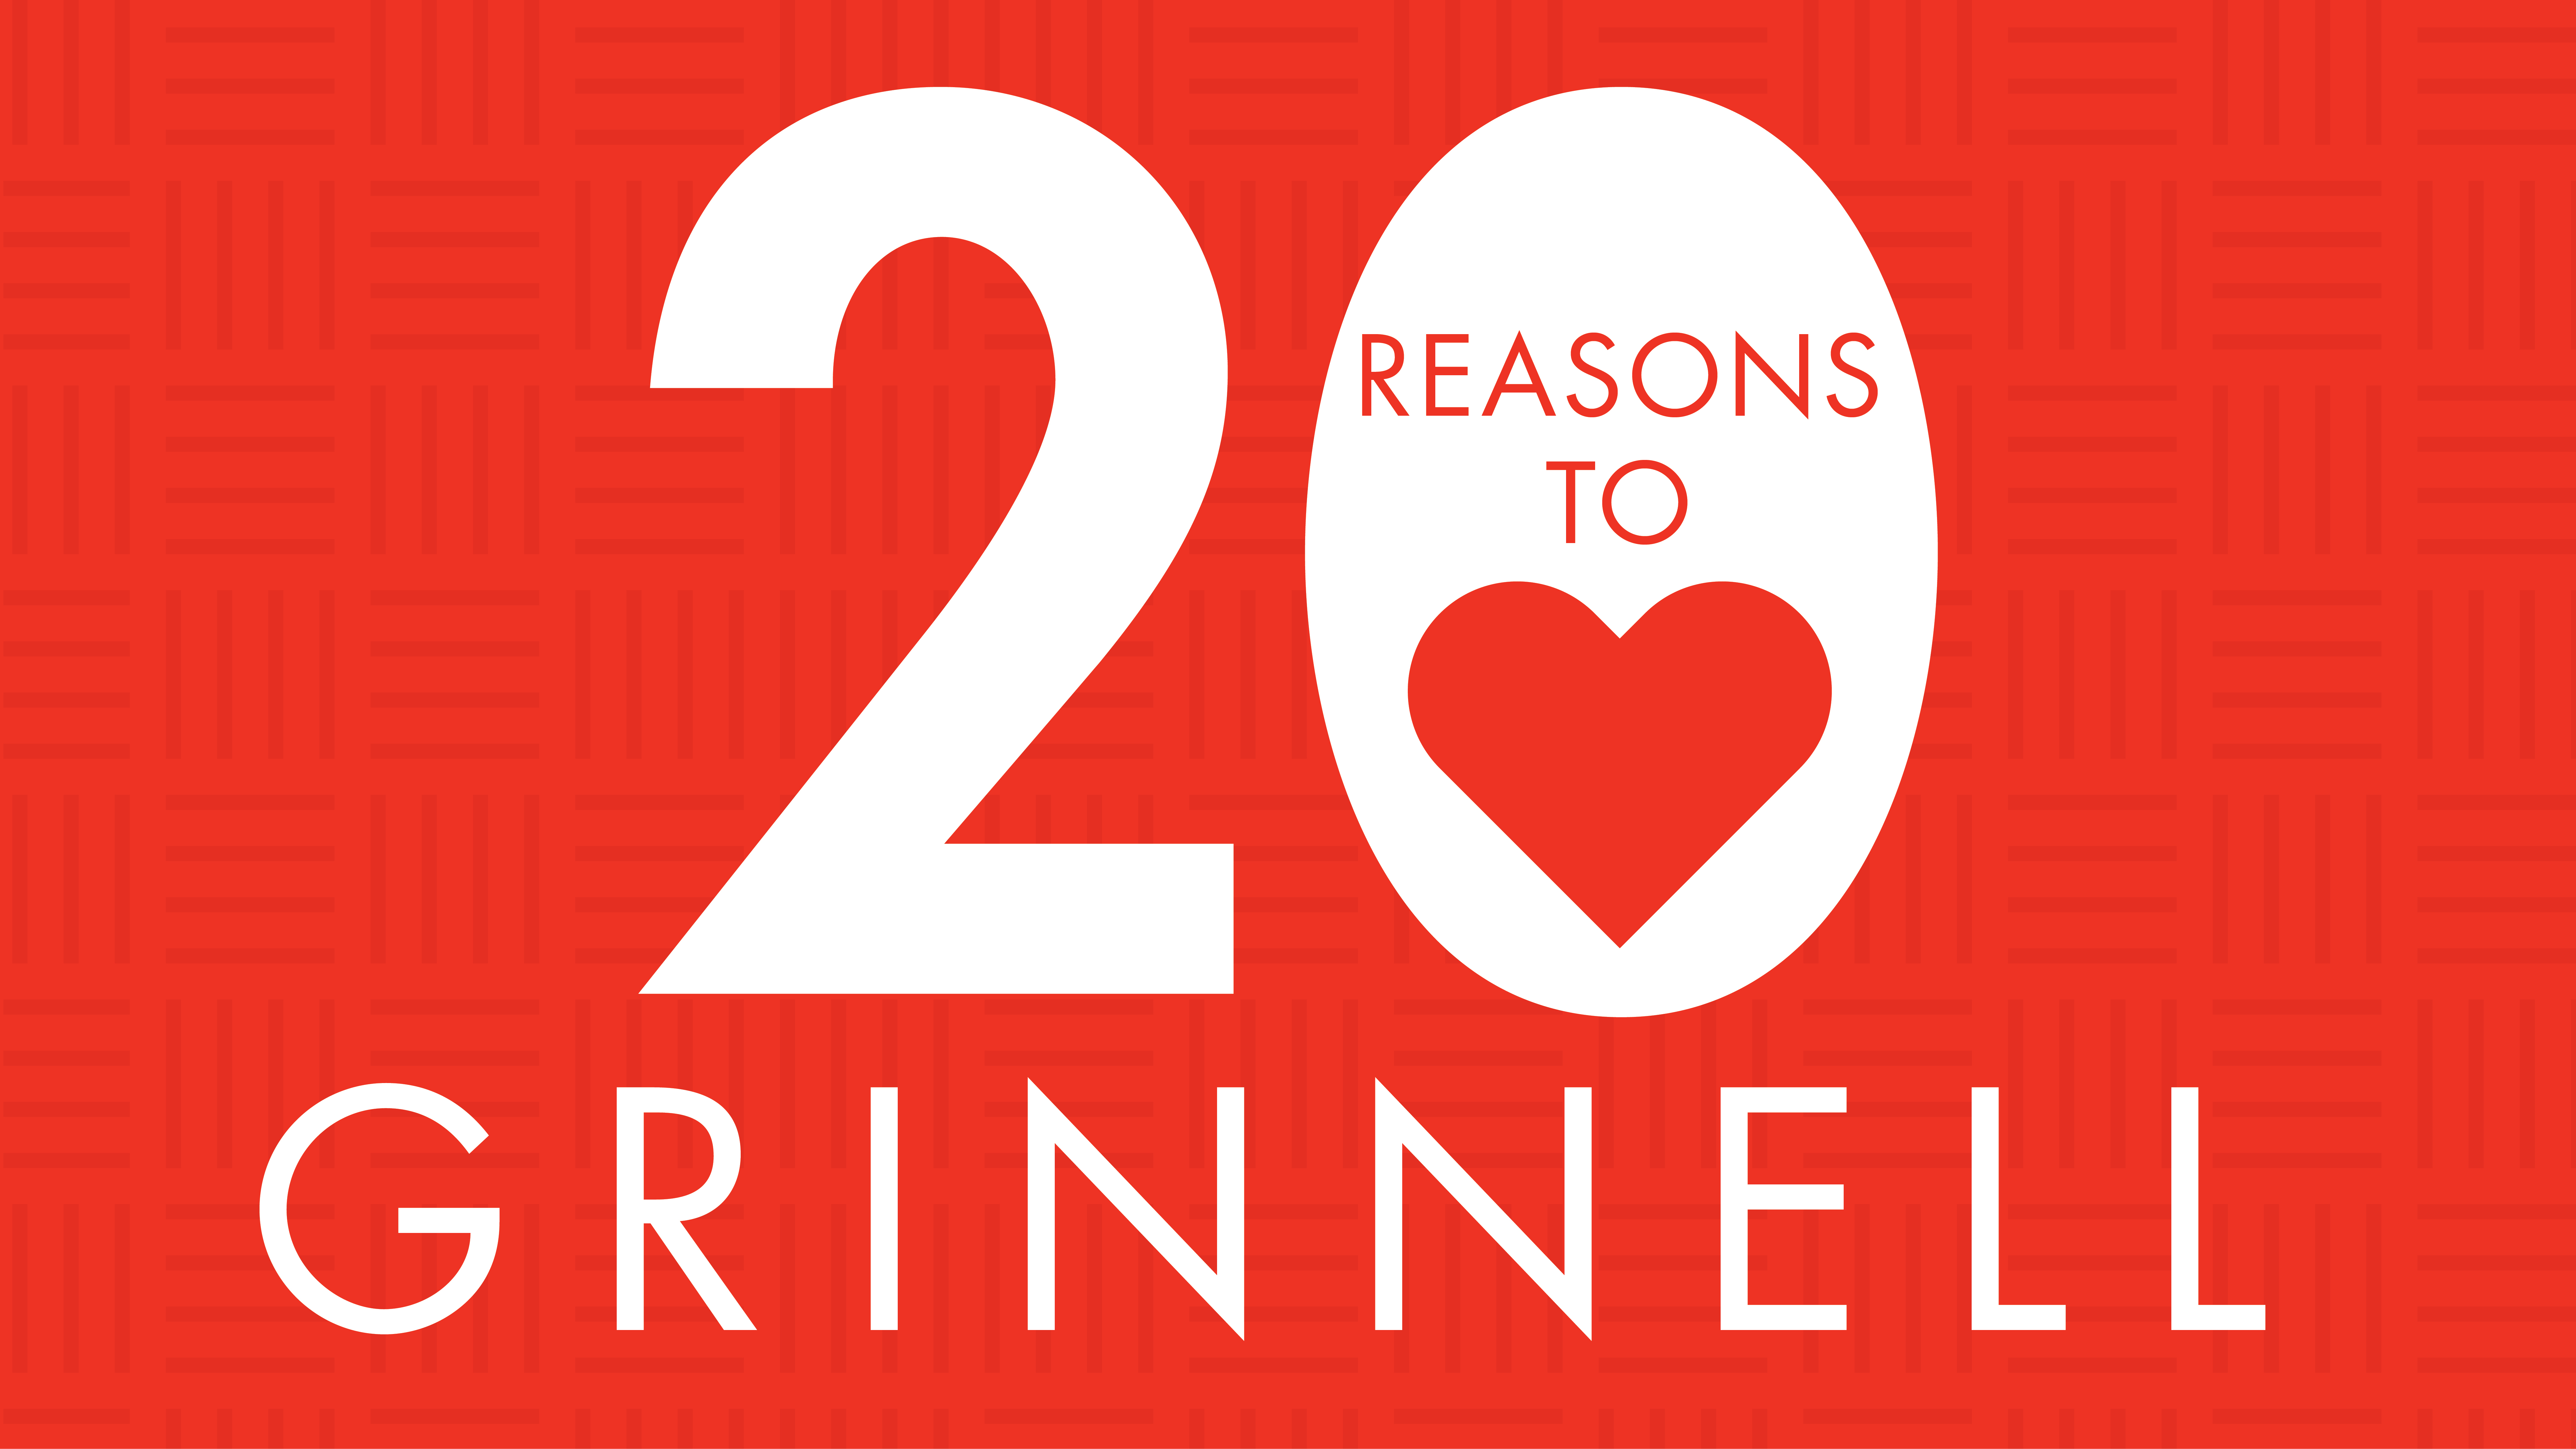 20 Reasons to Love Grinnell graphic with heart